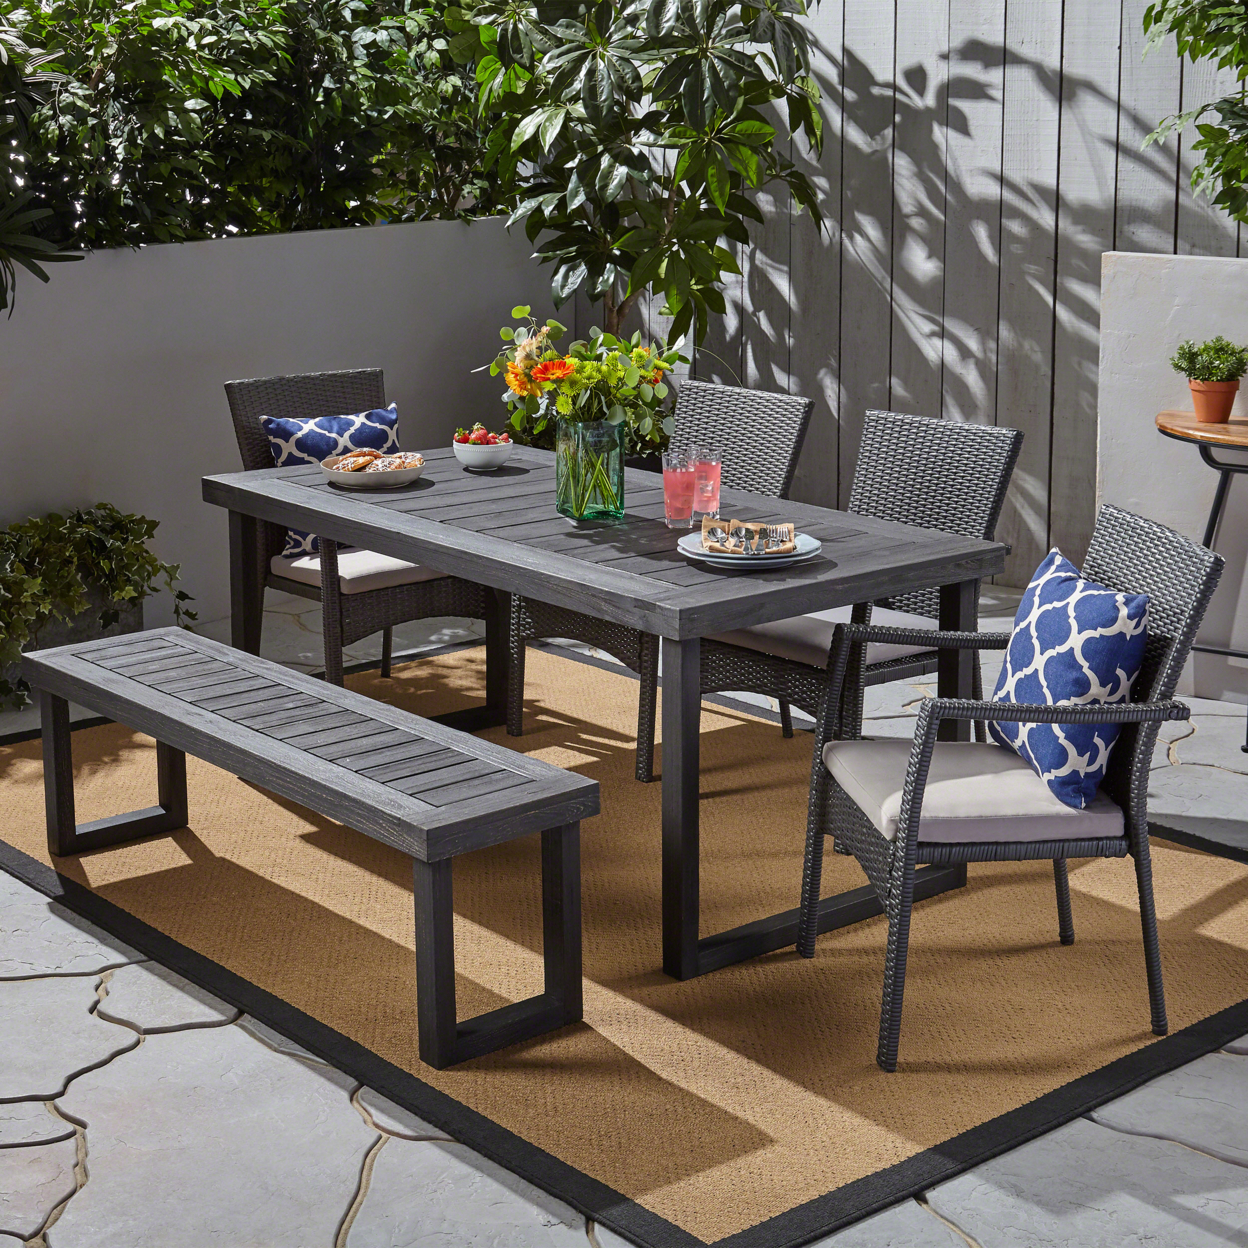 Odelette Isabel Outdoor 6-Seater Aluminum Dining Set With Wicker Chairs And Bench - Sandblast Dark Grey + Gray